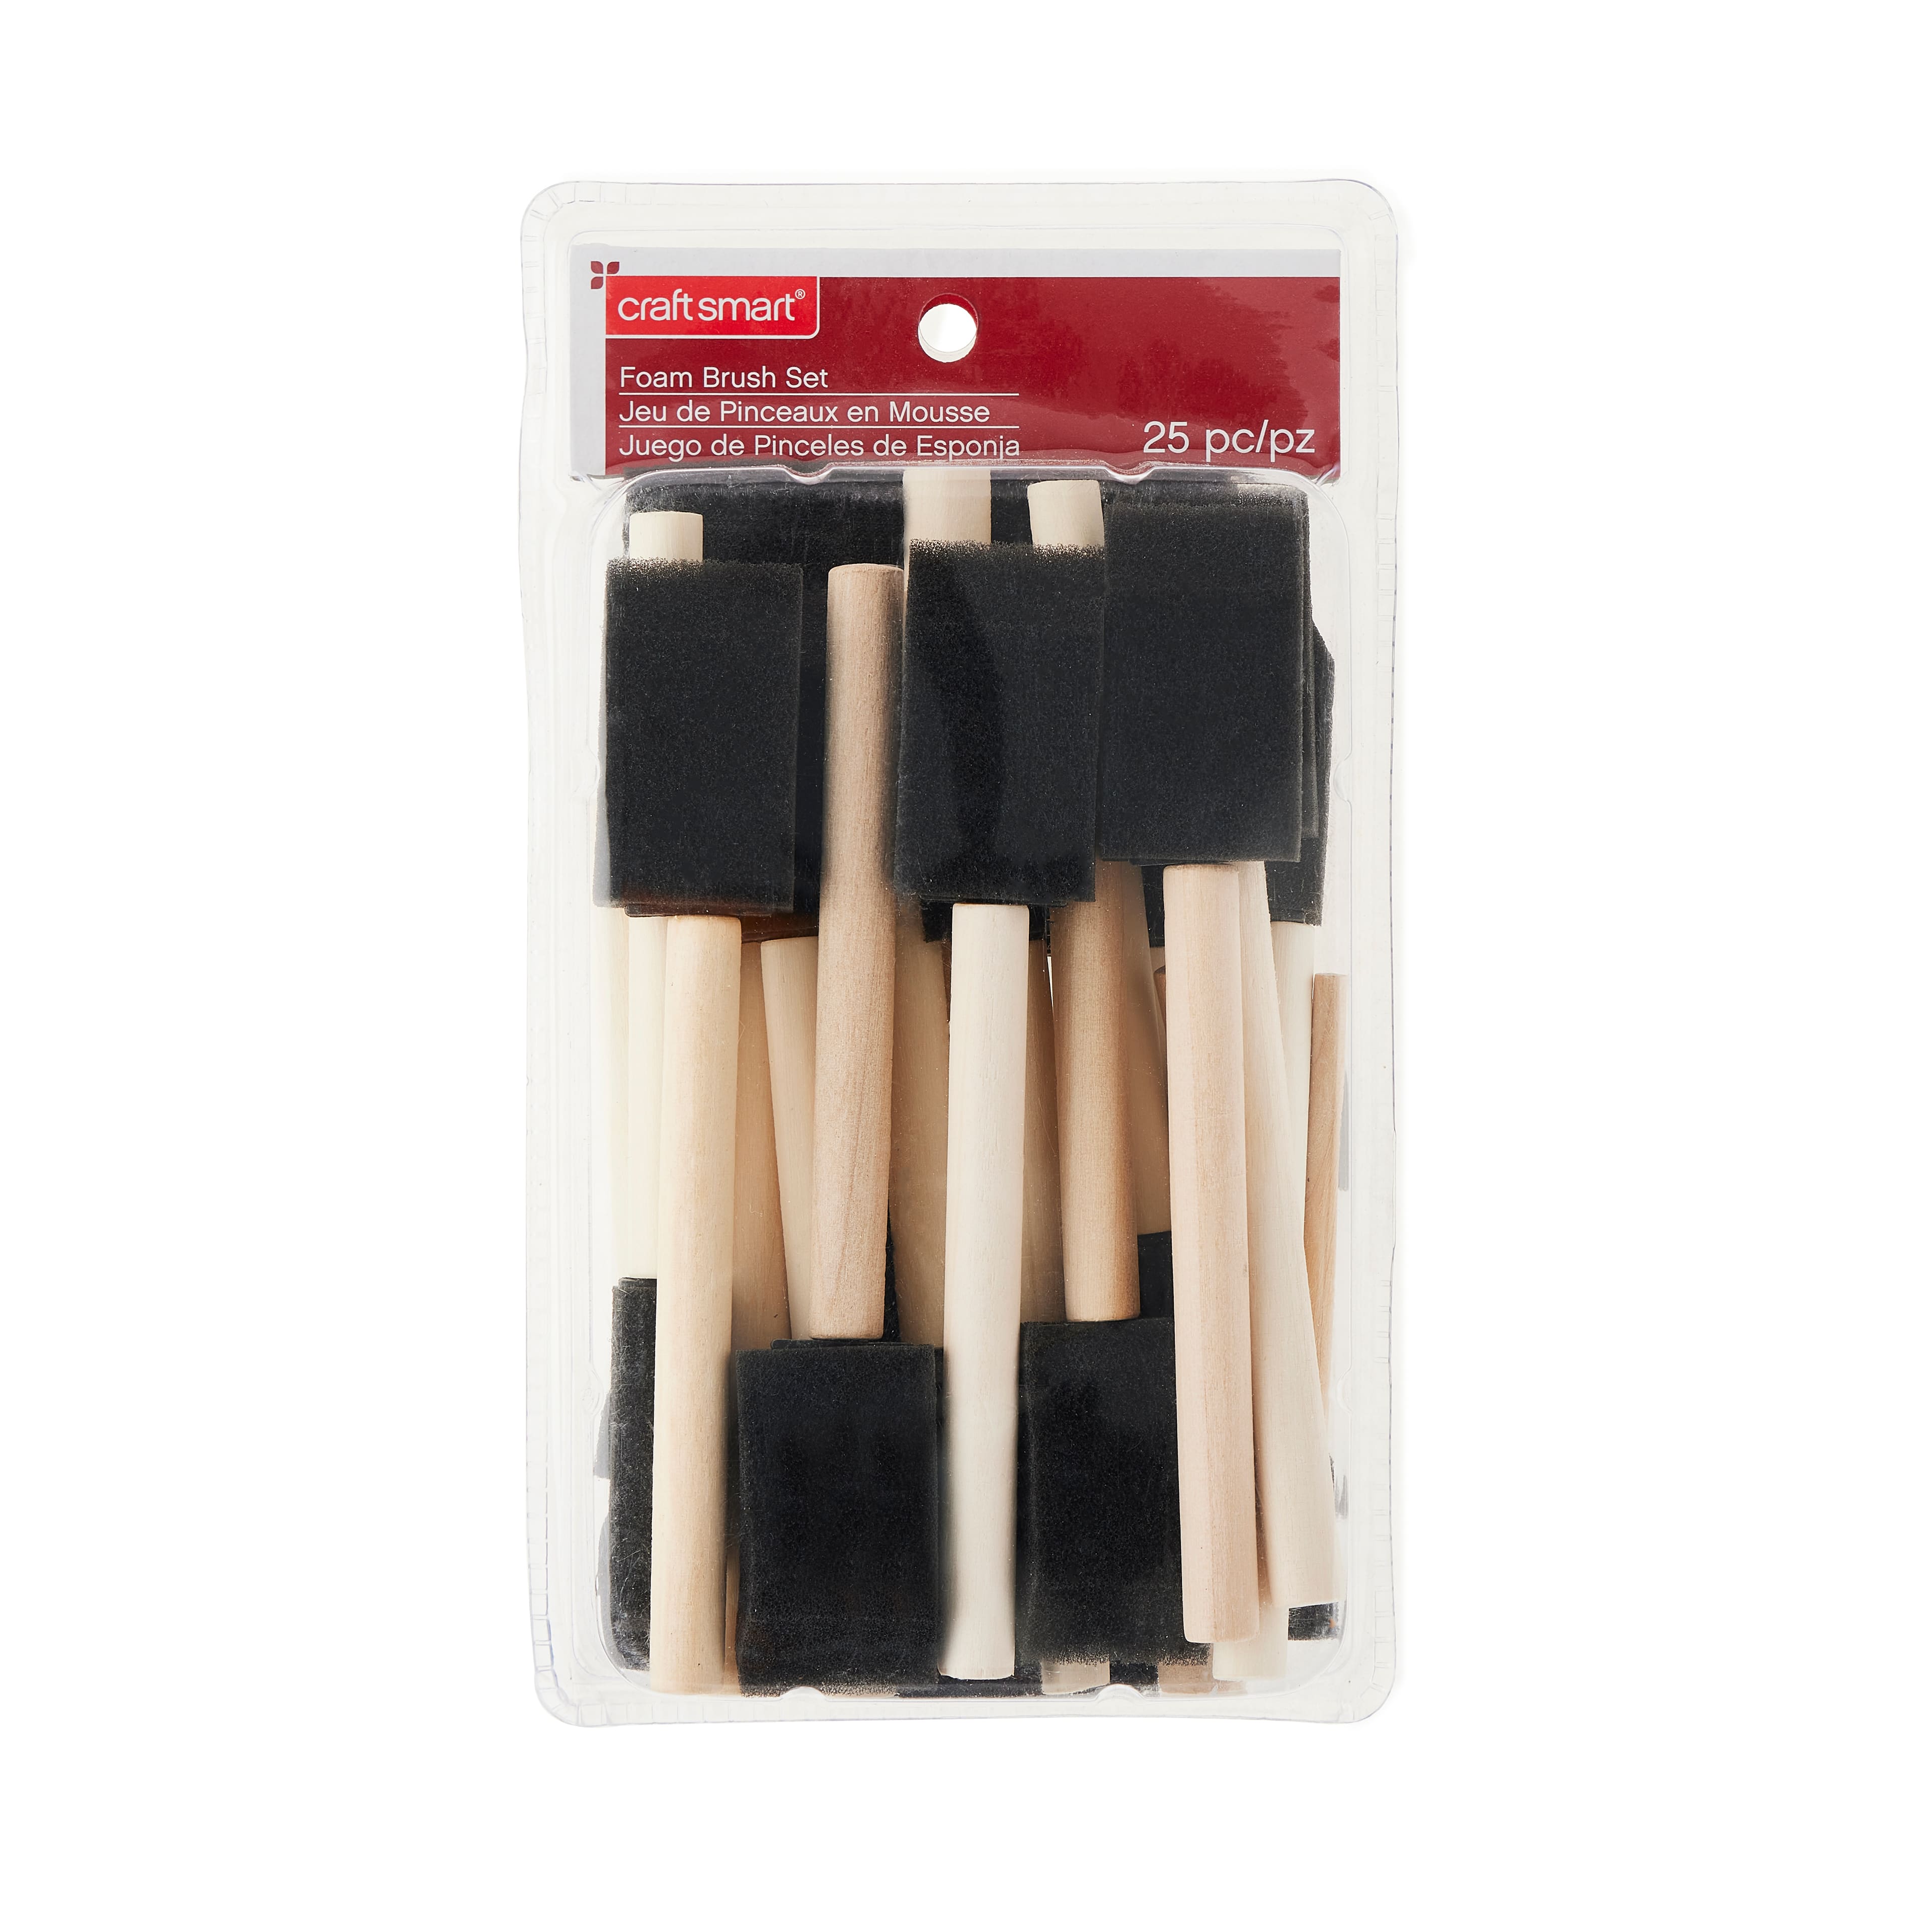 12 Packs: 5 Ct. (60 Total) All-Purpose Brush Set by Craft Smart | Michaels